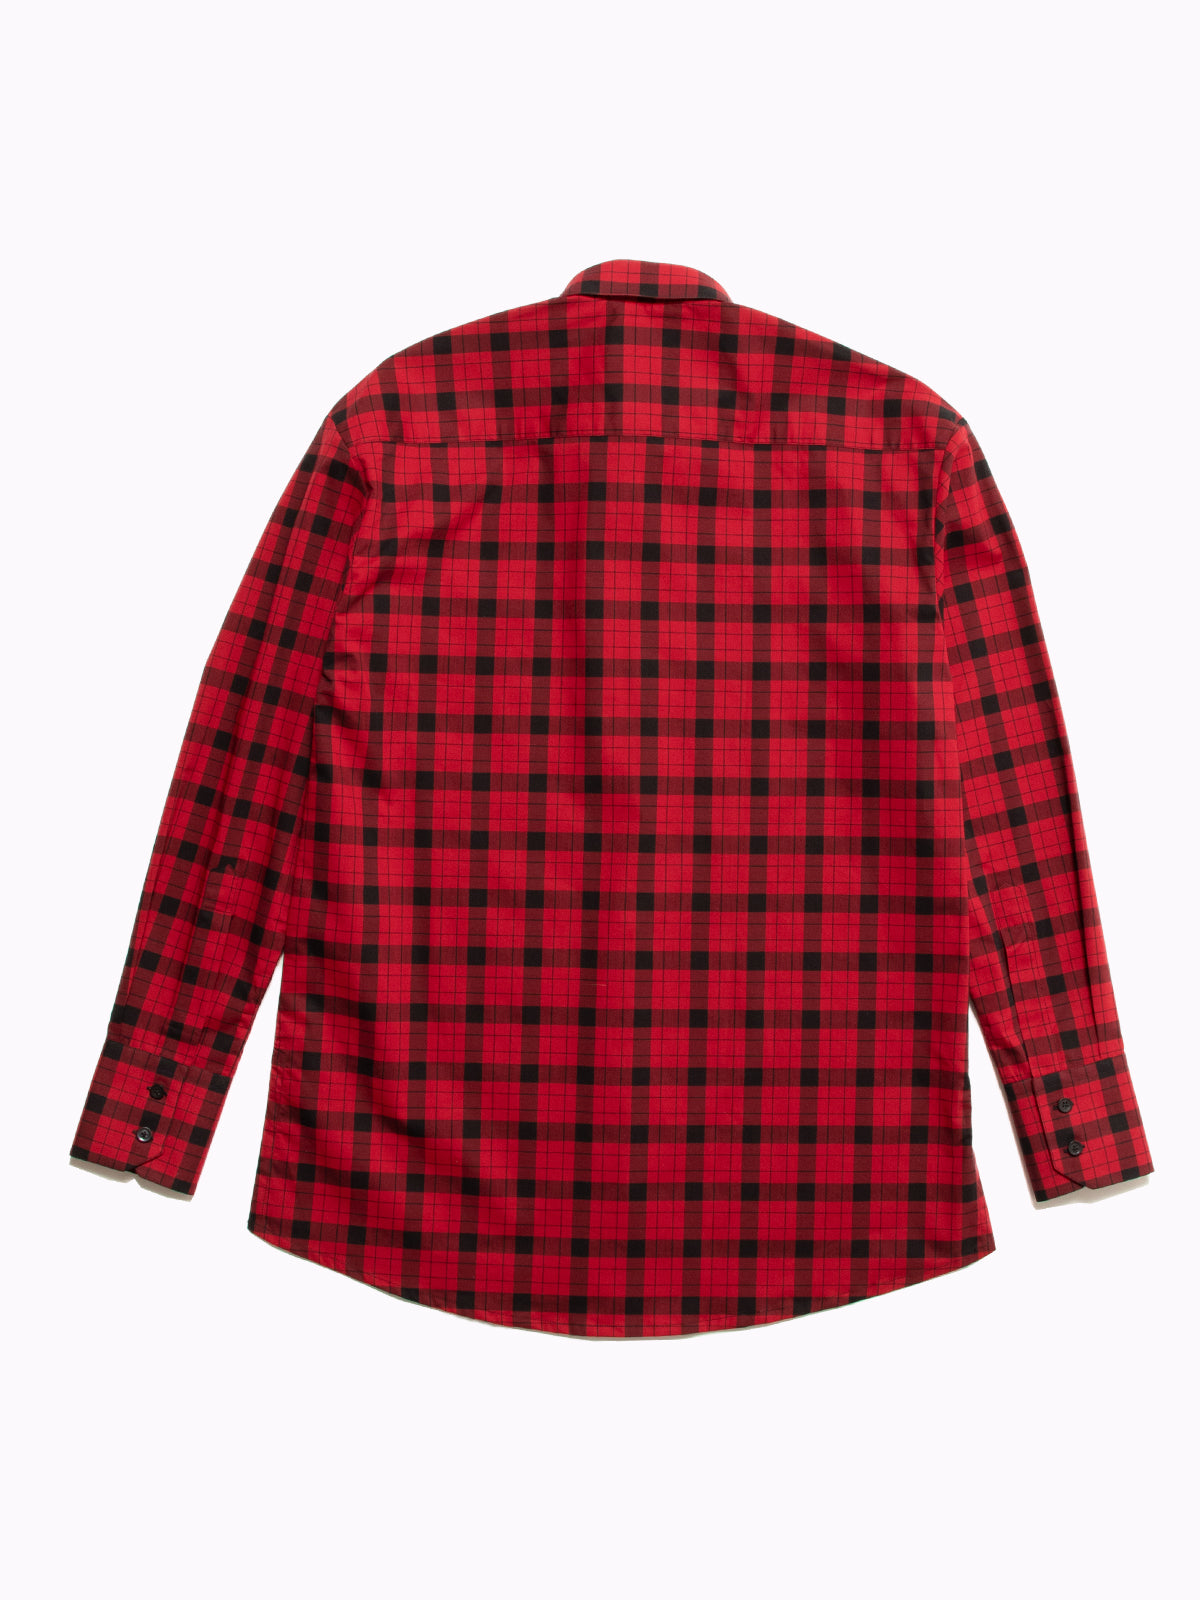 CLASSIC SHIRT (RED CHECK) - Baby's all right